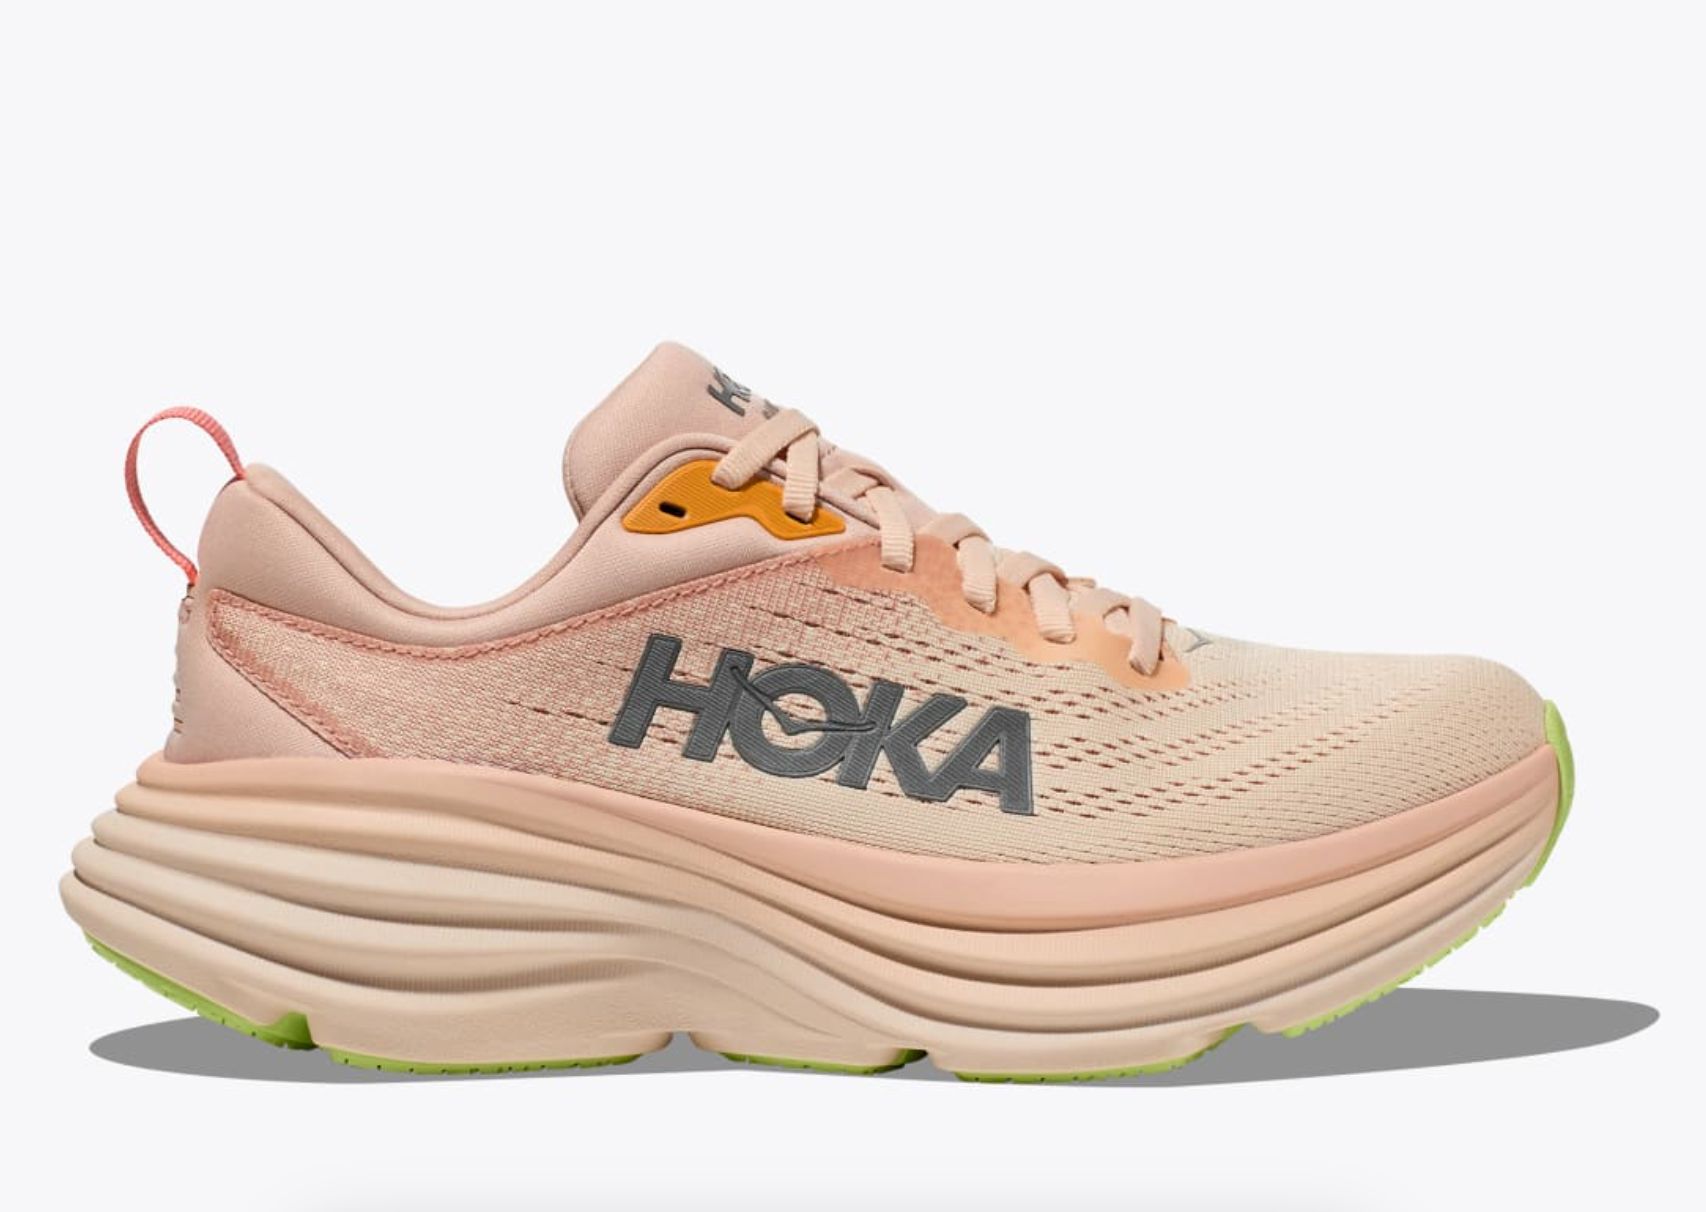 A single Hoka sneaker with a thick sole, featuring the brand logo on the side.
